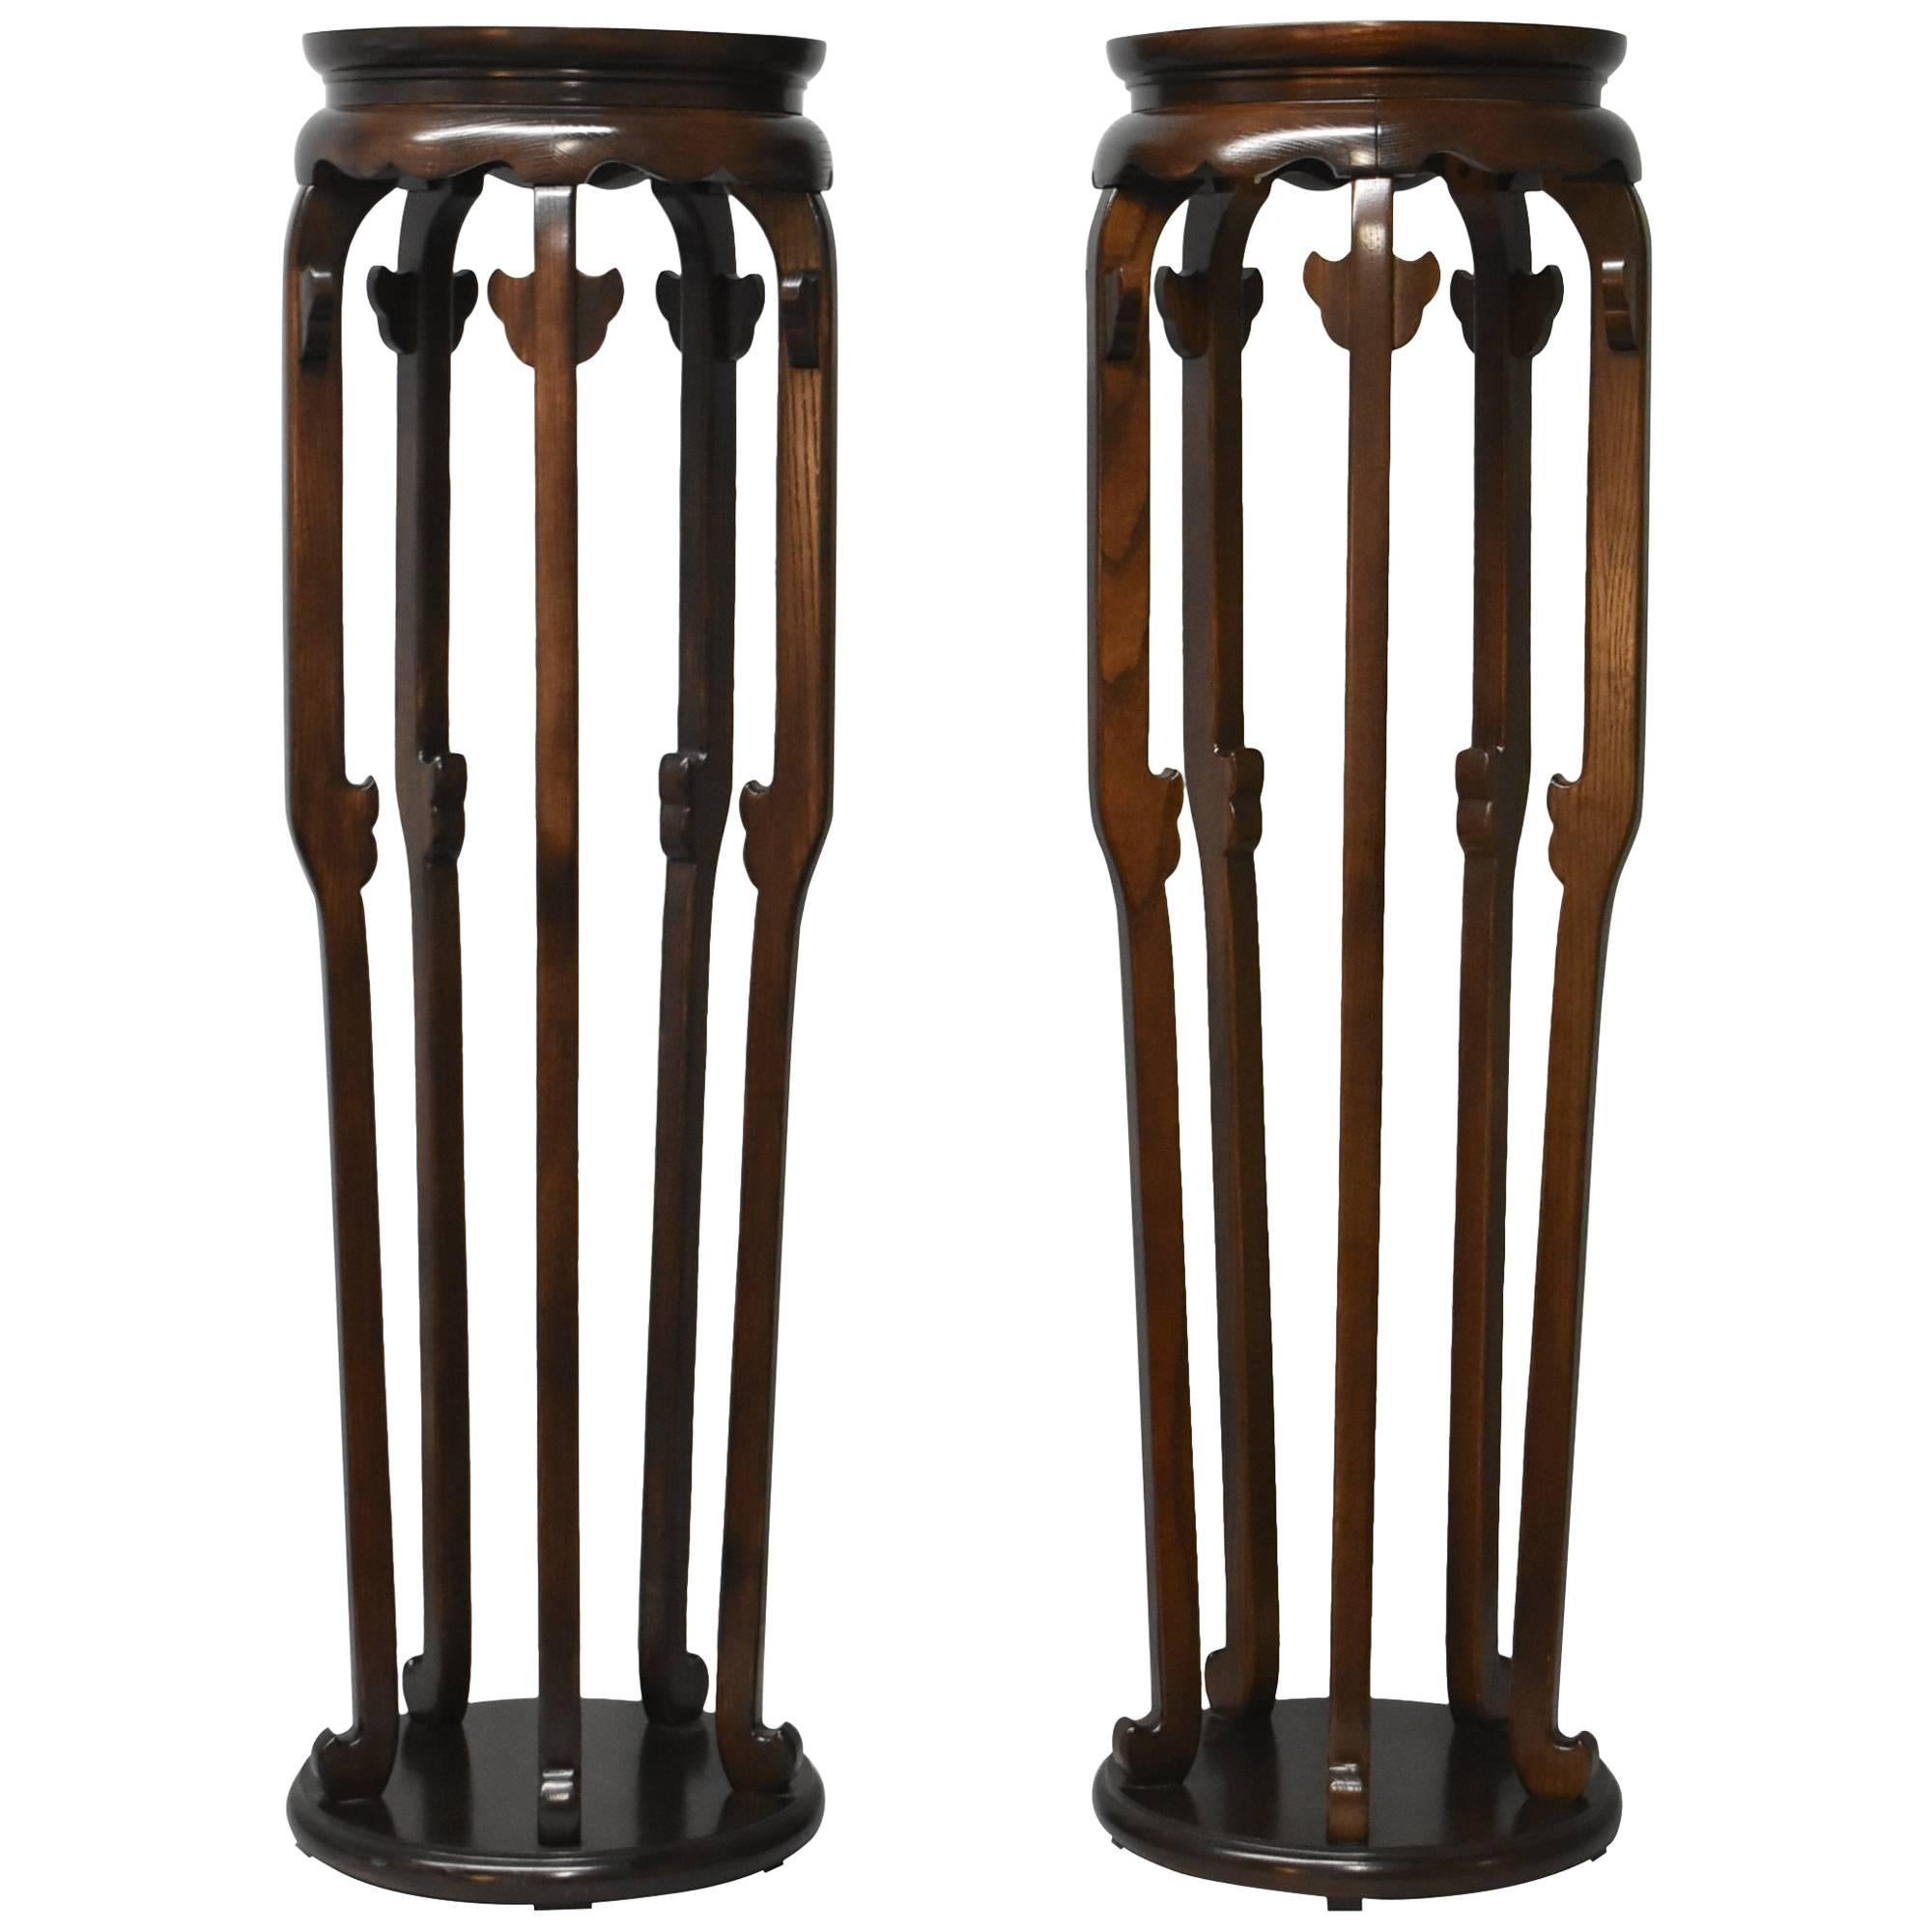 Pair of Asian Burl Plant Stands Designed by Michael Taylor for Baker Furniture